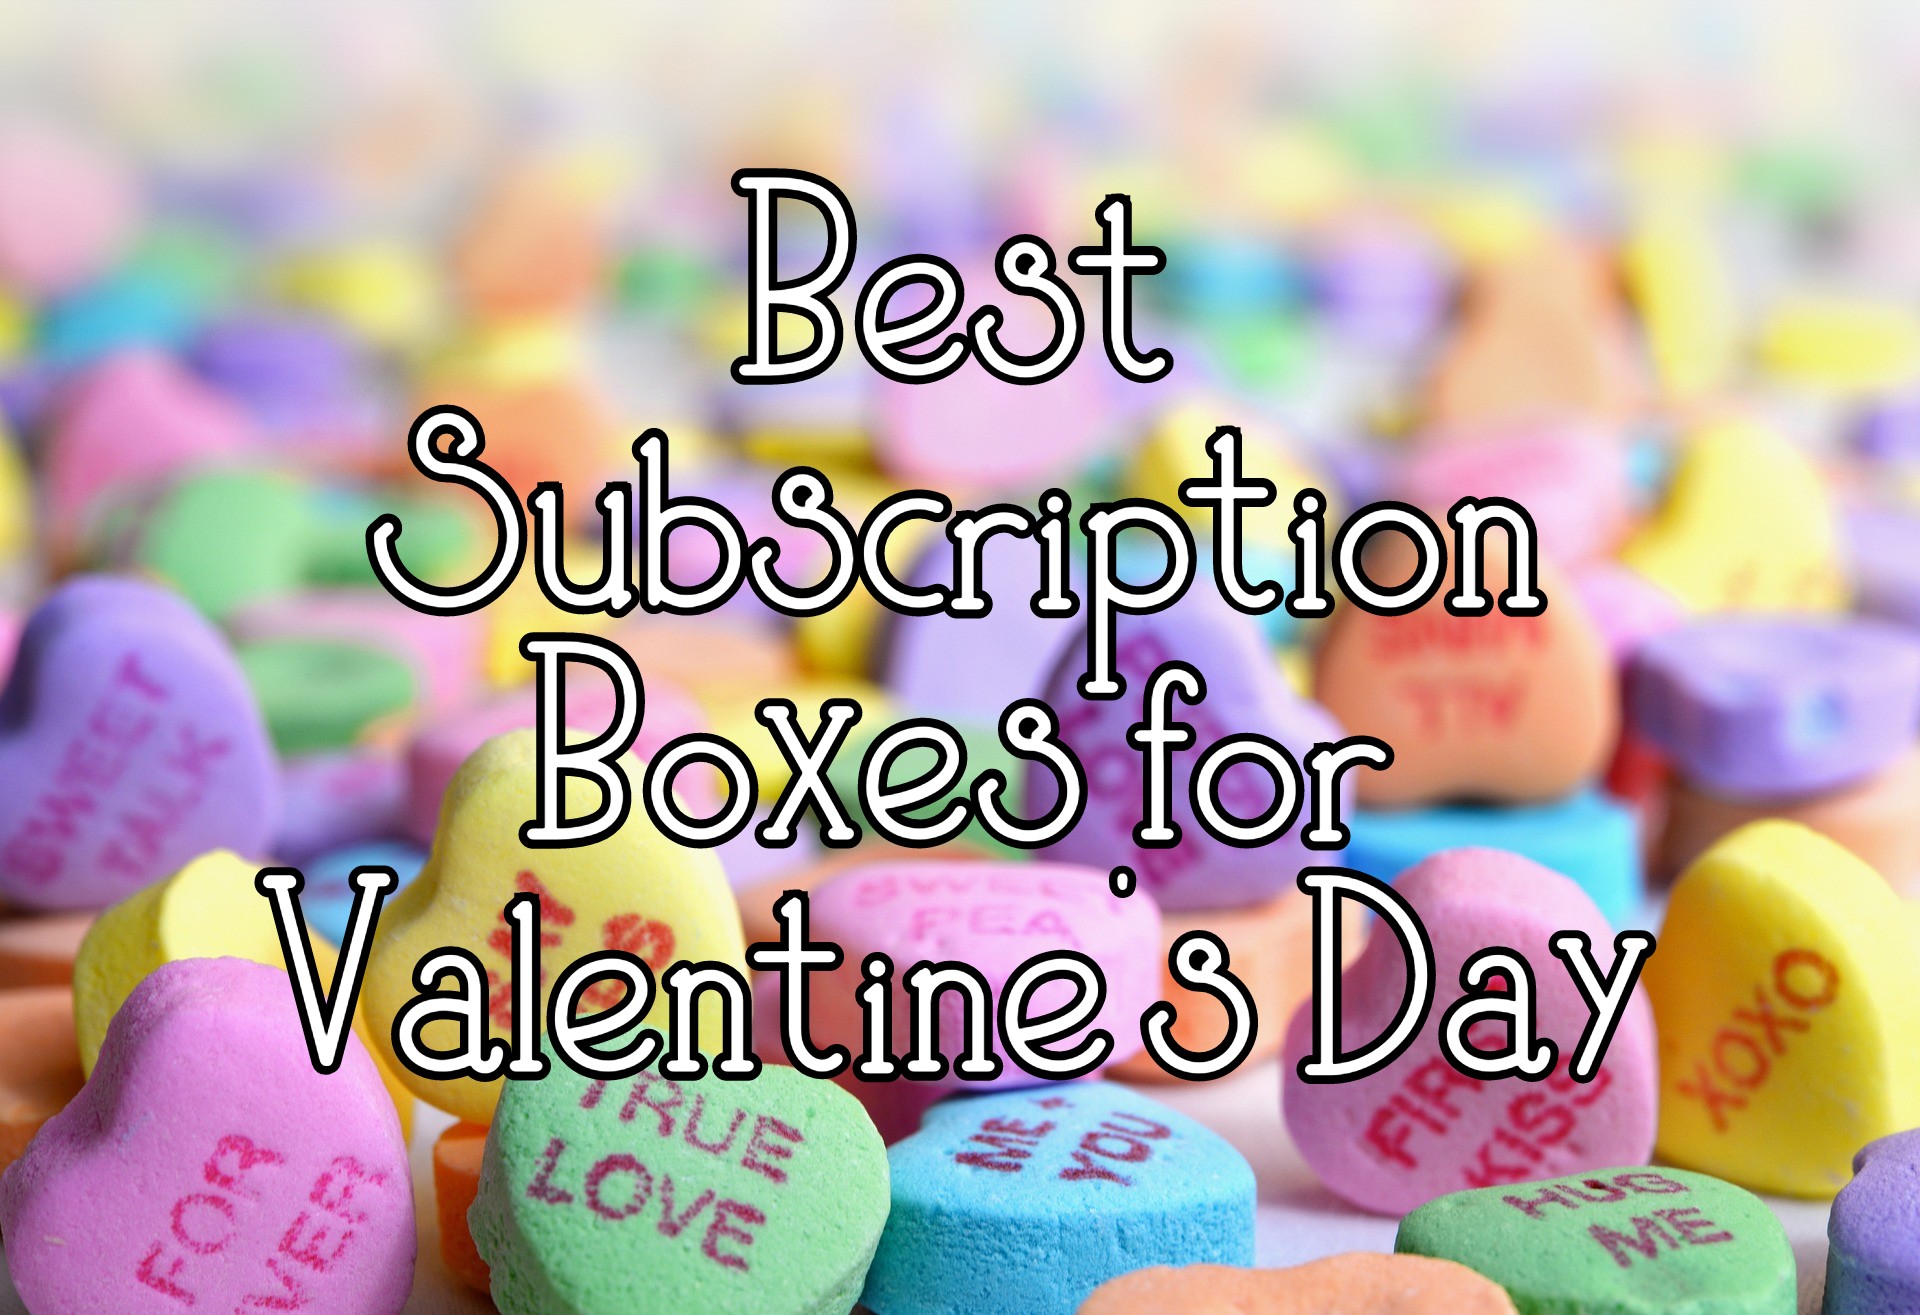 Best Subscription Boxes for Valentine’s Day